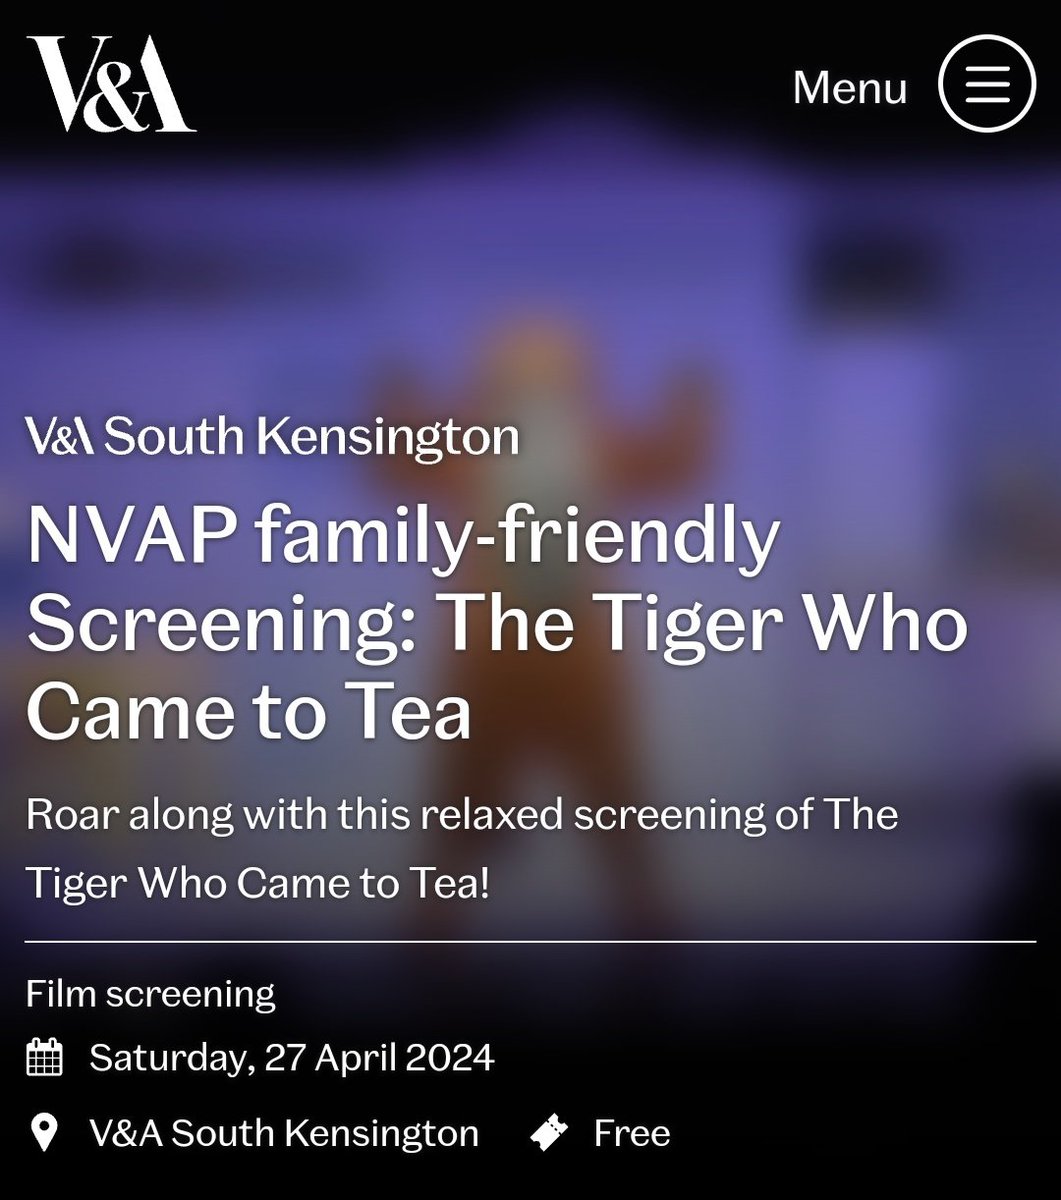 Sat 27 April: NVAP family-friendly Screening: The Tiger Who Came to Tea. Roar along with this relaxed screening of The Tiger Who Came to Tea! vam.ac.uk/event/KpYg0y0W…